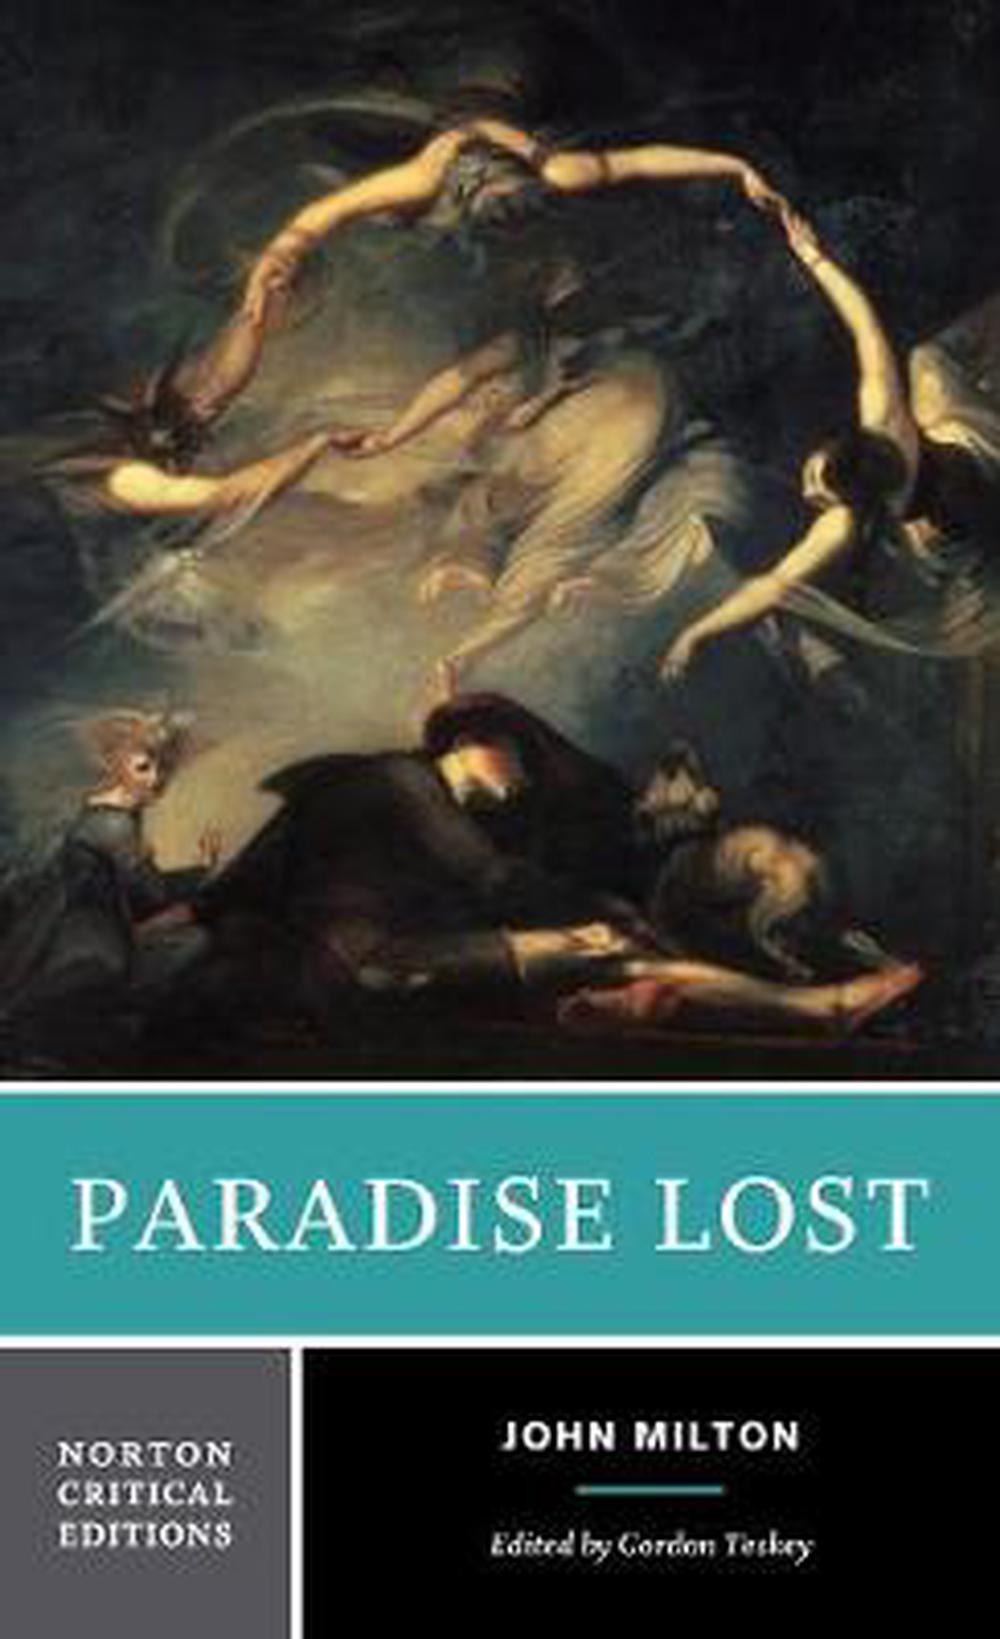 paradise lost book 1